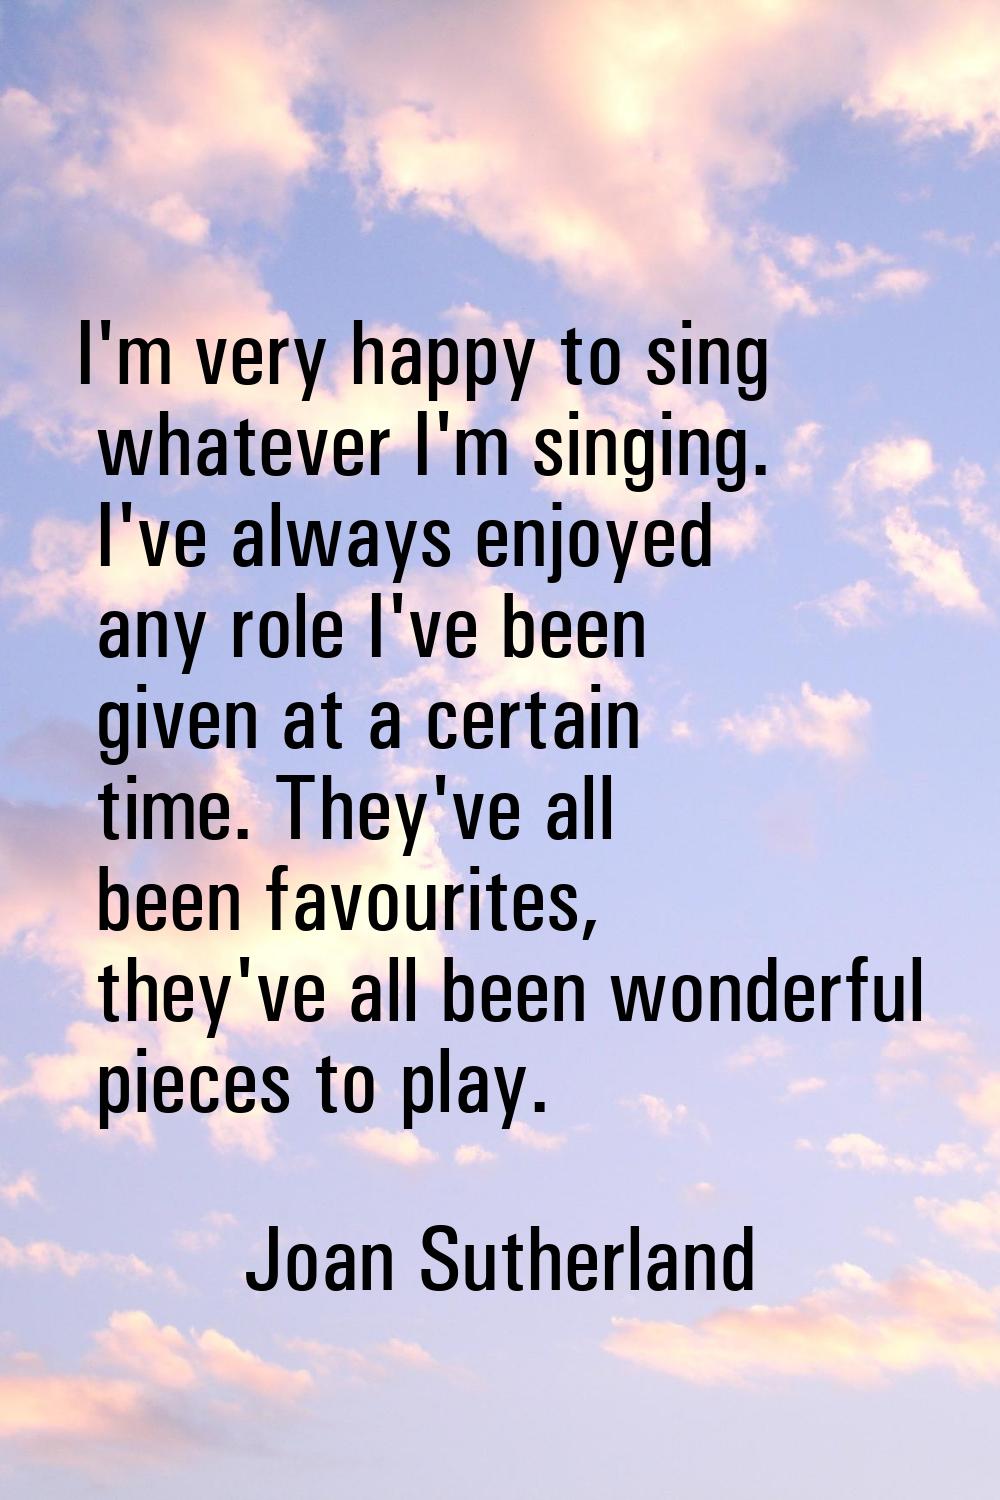 I'm very happy to sing whatever I'm singing. I've always enjoyed any role I've been given at a cert